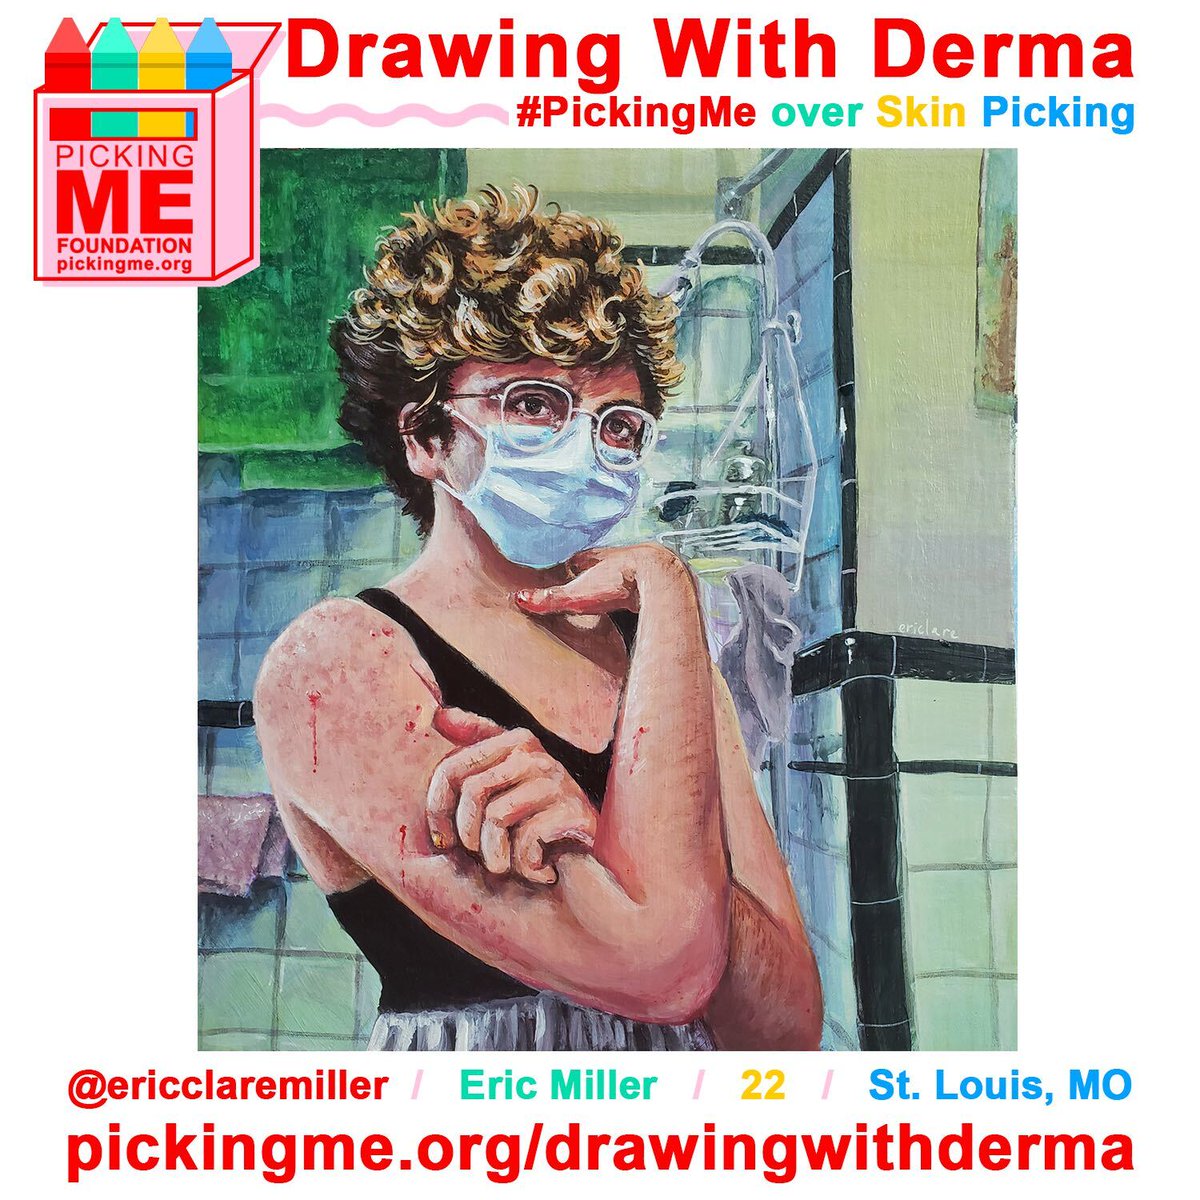 This #InspireYourHeartWithArtDay, let’s take in some of the over 350 artworks depicting dermatillomania that have been submitted to our online art gallery. How does viewing others’ art about their experience with skin picking disorder impact you loves? Share below :)